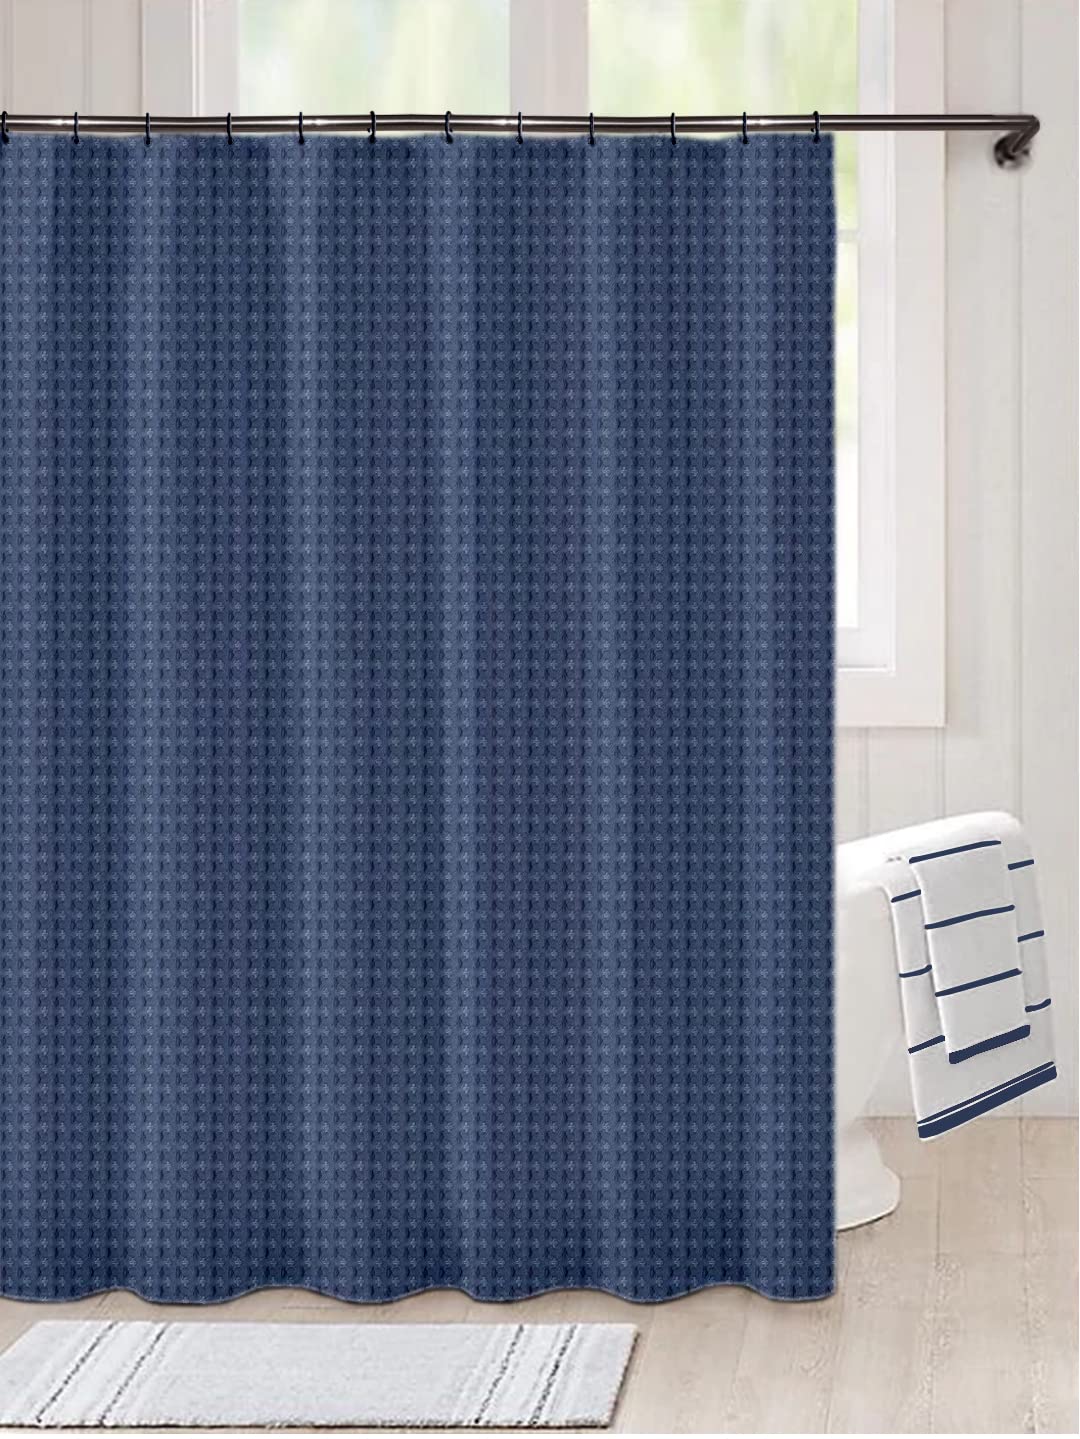 Waffle Weave Shower Curtains , 70x72 Inches Bath Cloth Curtain, Bathroom curtain for shower, Thick Heavy Duty Fabric, Blue, with 12 Rust-Resistant Metal Grommets and no Hooks, Modern, Hotel Quality, Machine Washable Polyester Blend by Lushomes